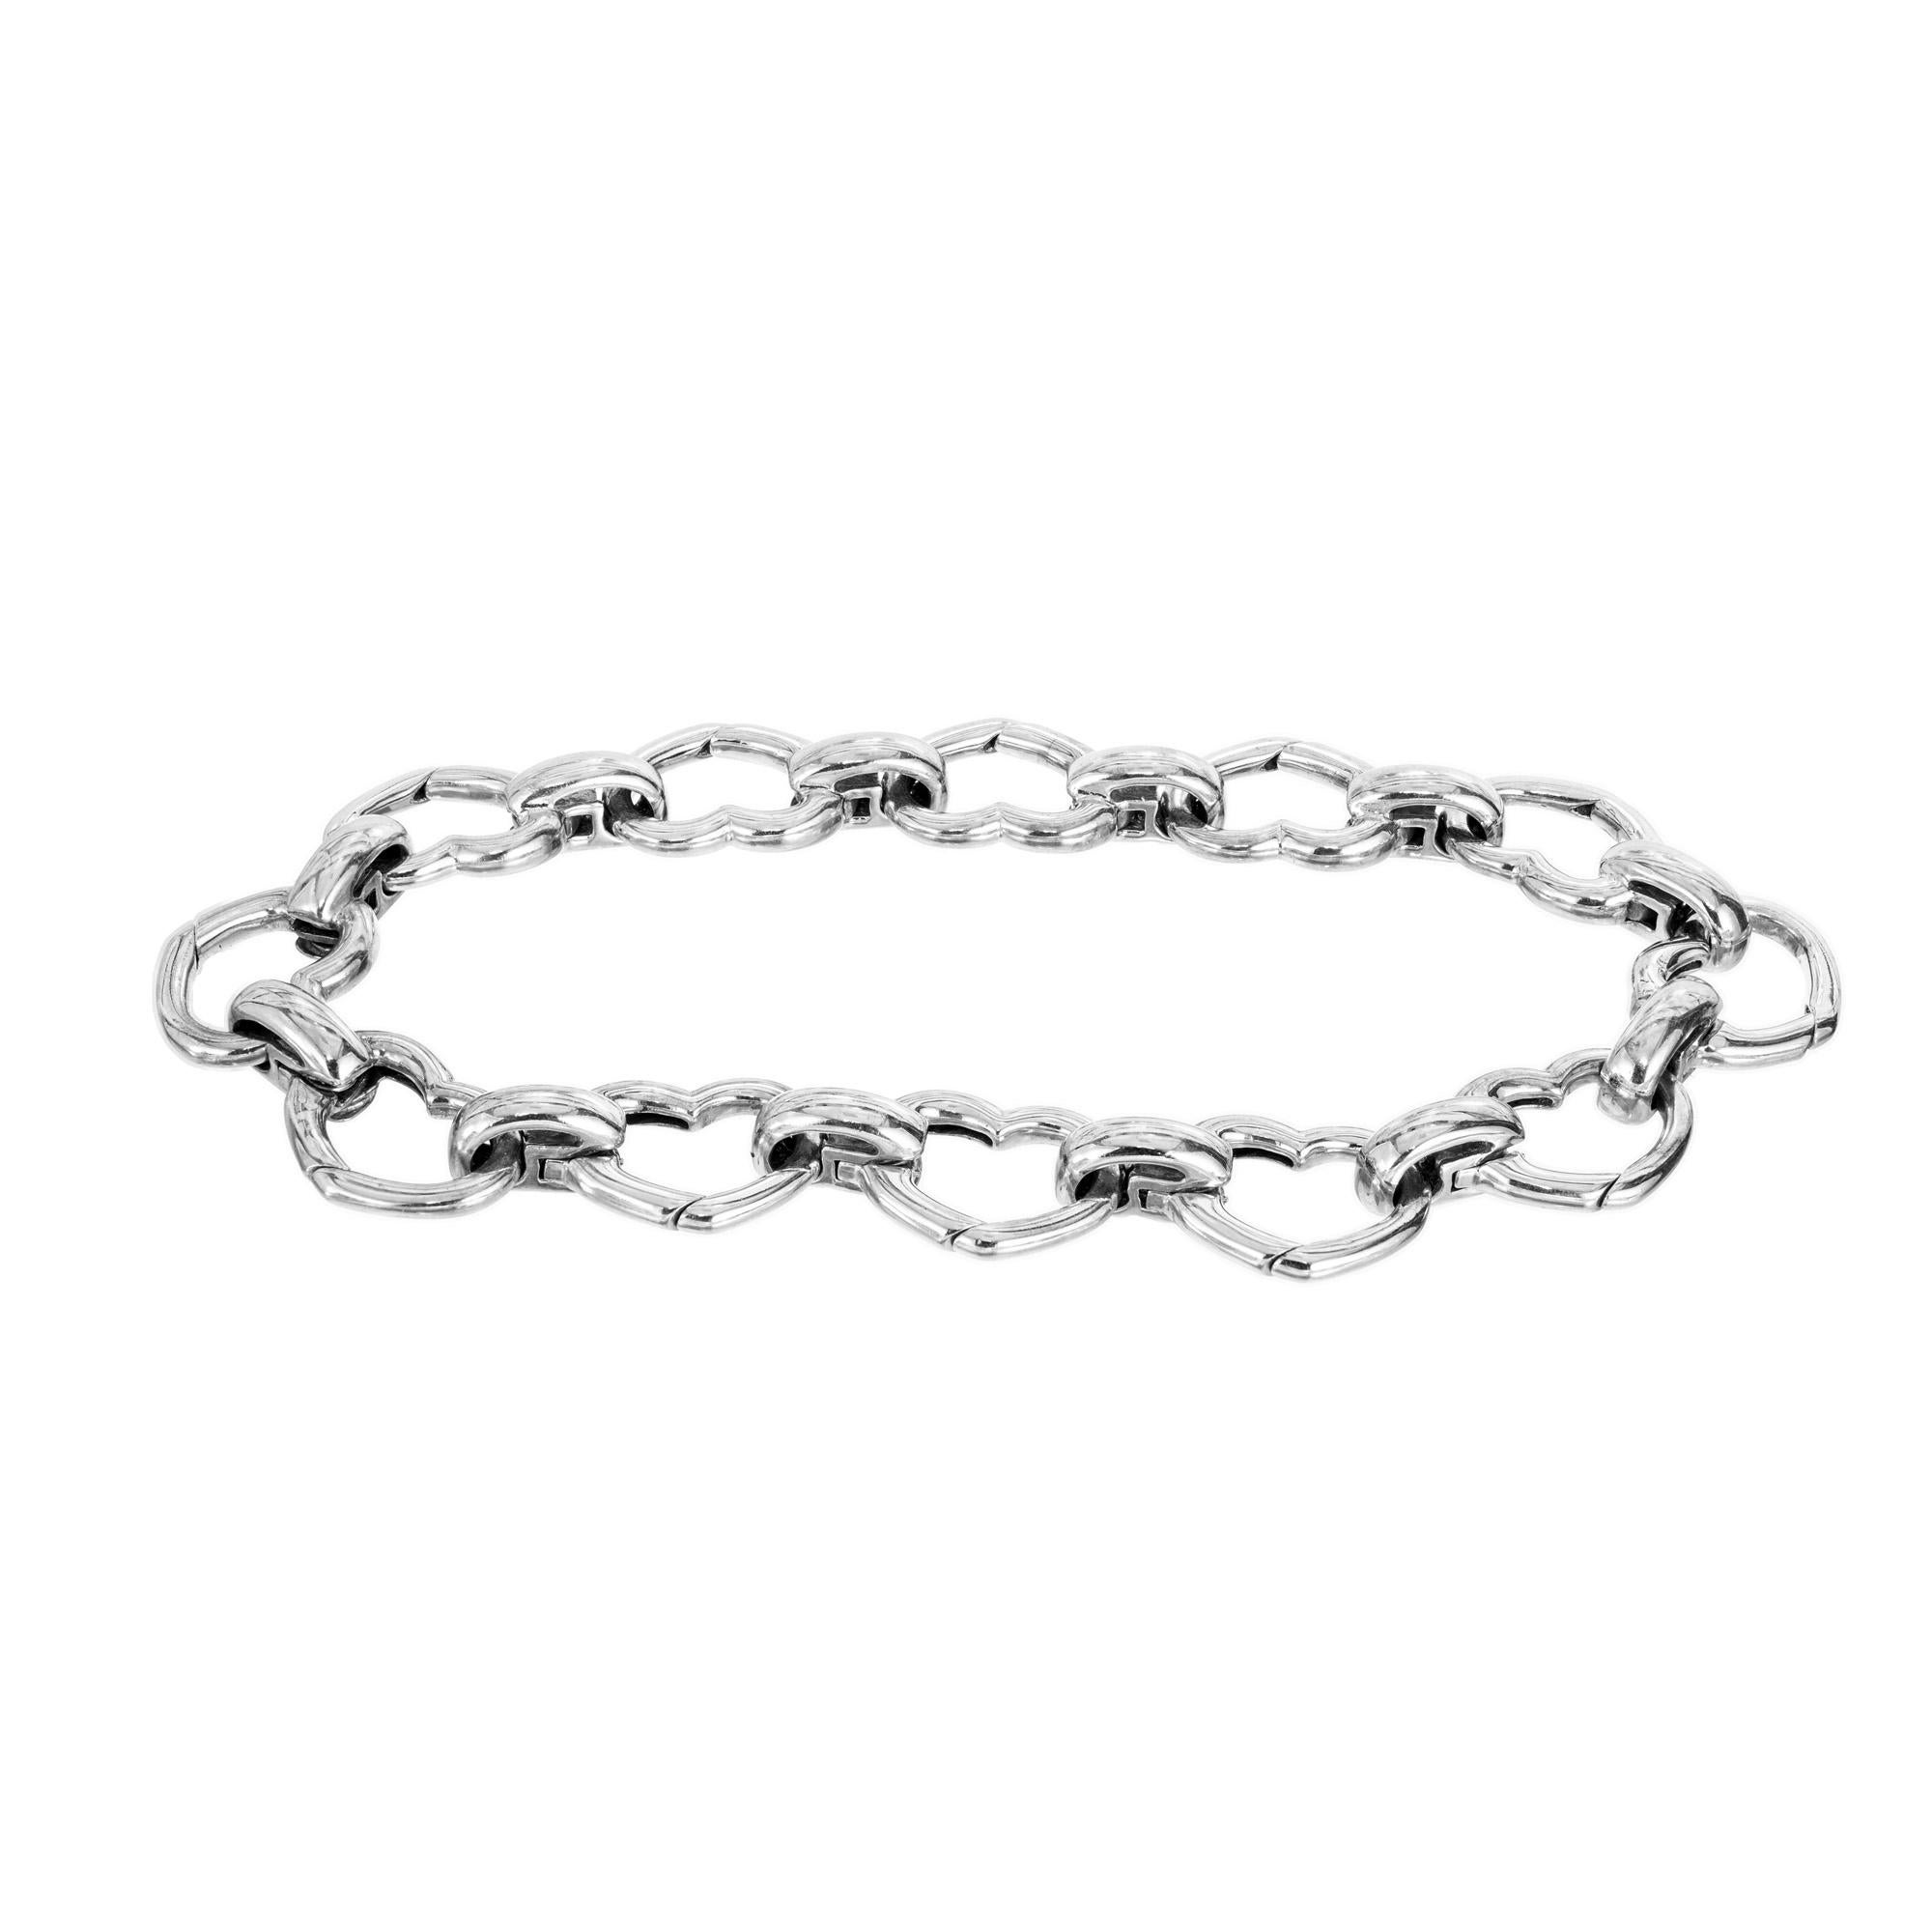 Aaron Basha Heart Shape Gold Link Bracelet. 12, 18k white gold heart shape links connected by oval links. This bracelet is perfect for both casual and formal occasions and measures at 7.25 inches. Both links are highly polished and have great shine.